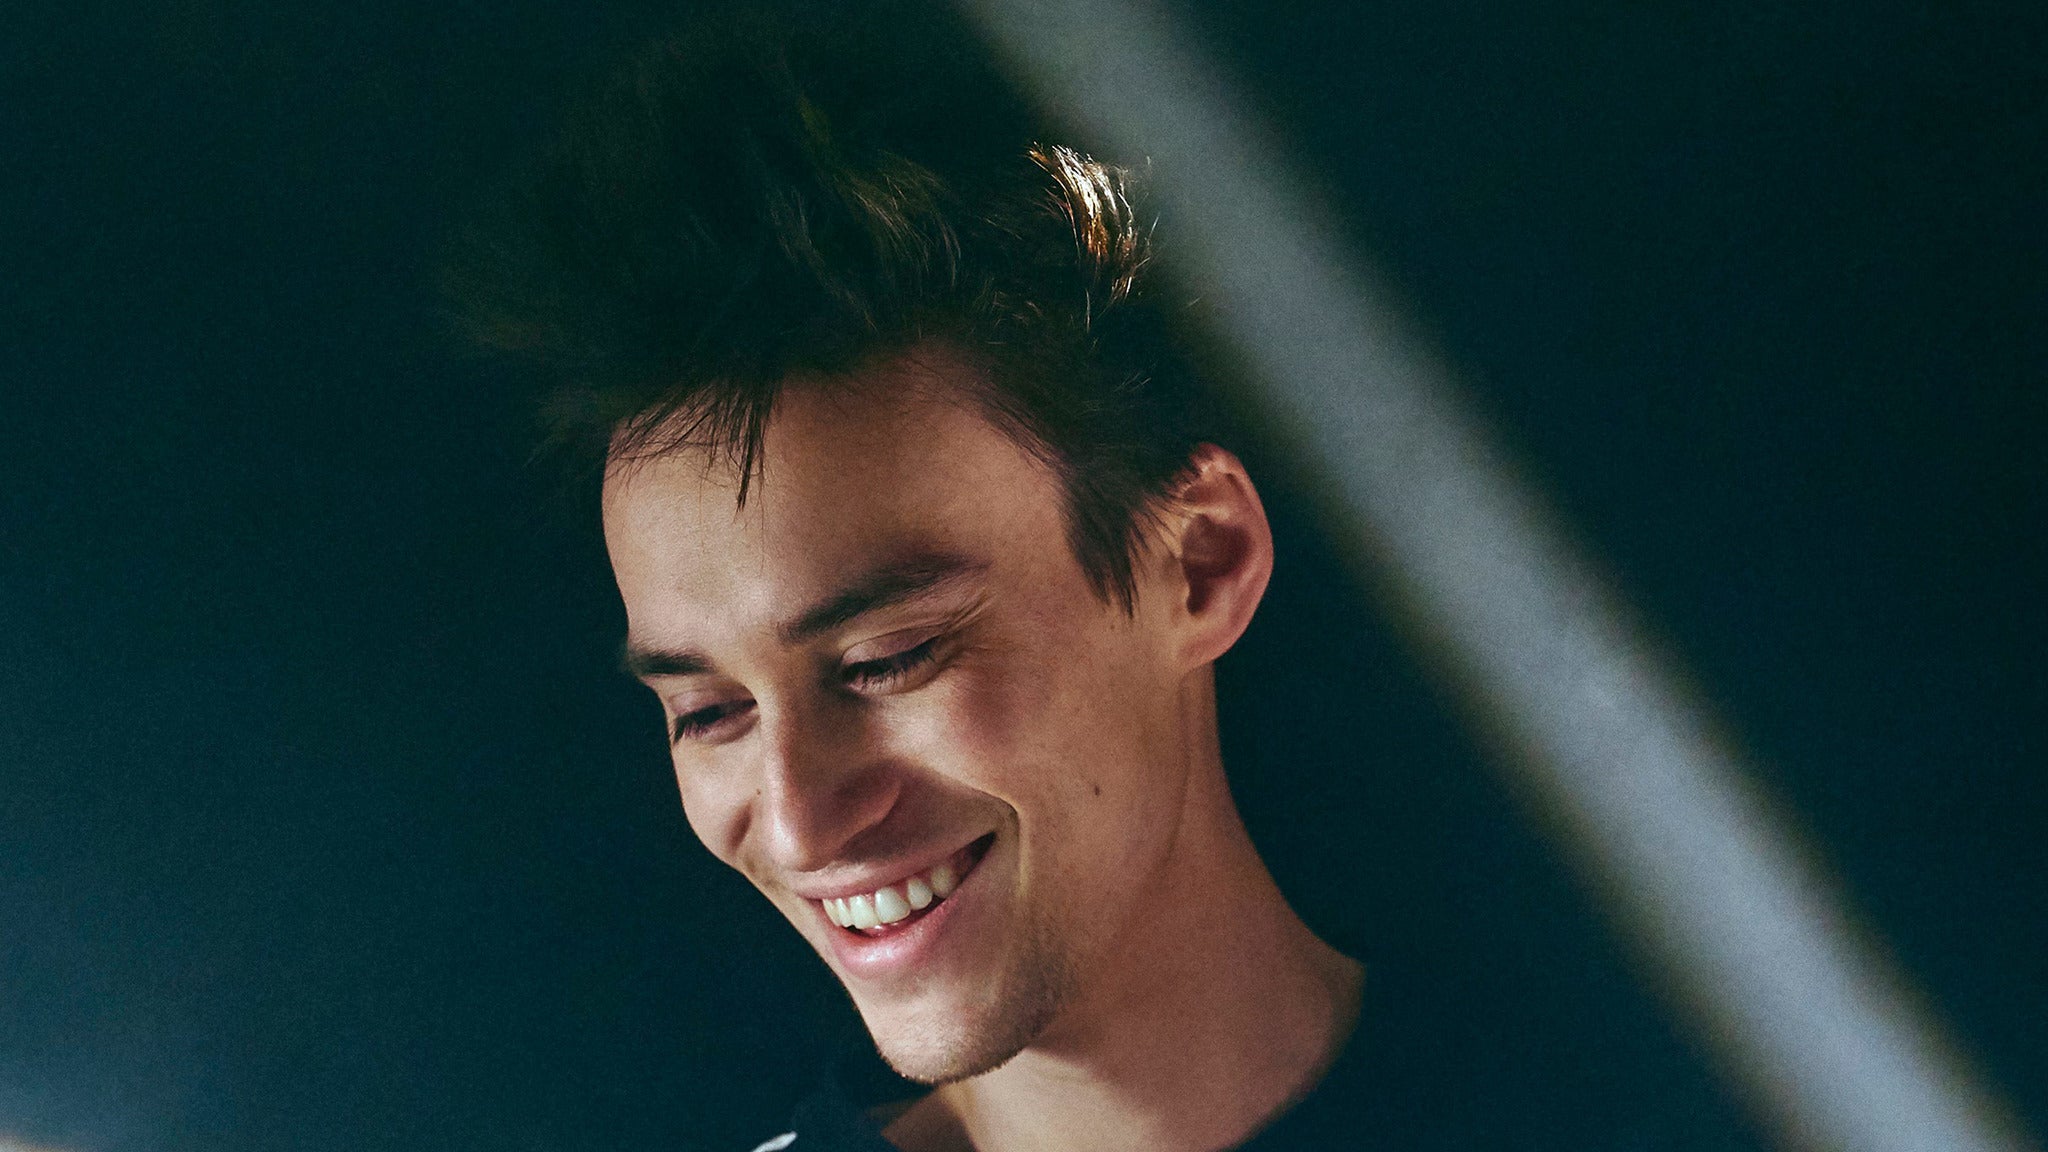 Jacob Collier - DJESSE World Tour Spring 2022 in Montreal promo photo for MRG Live Presale password required presale offer code